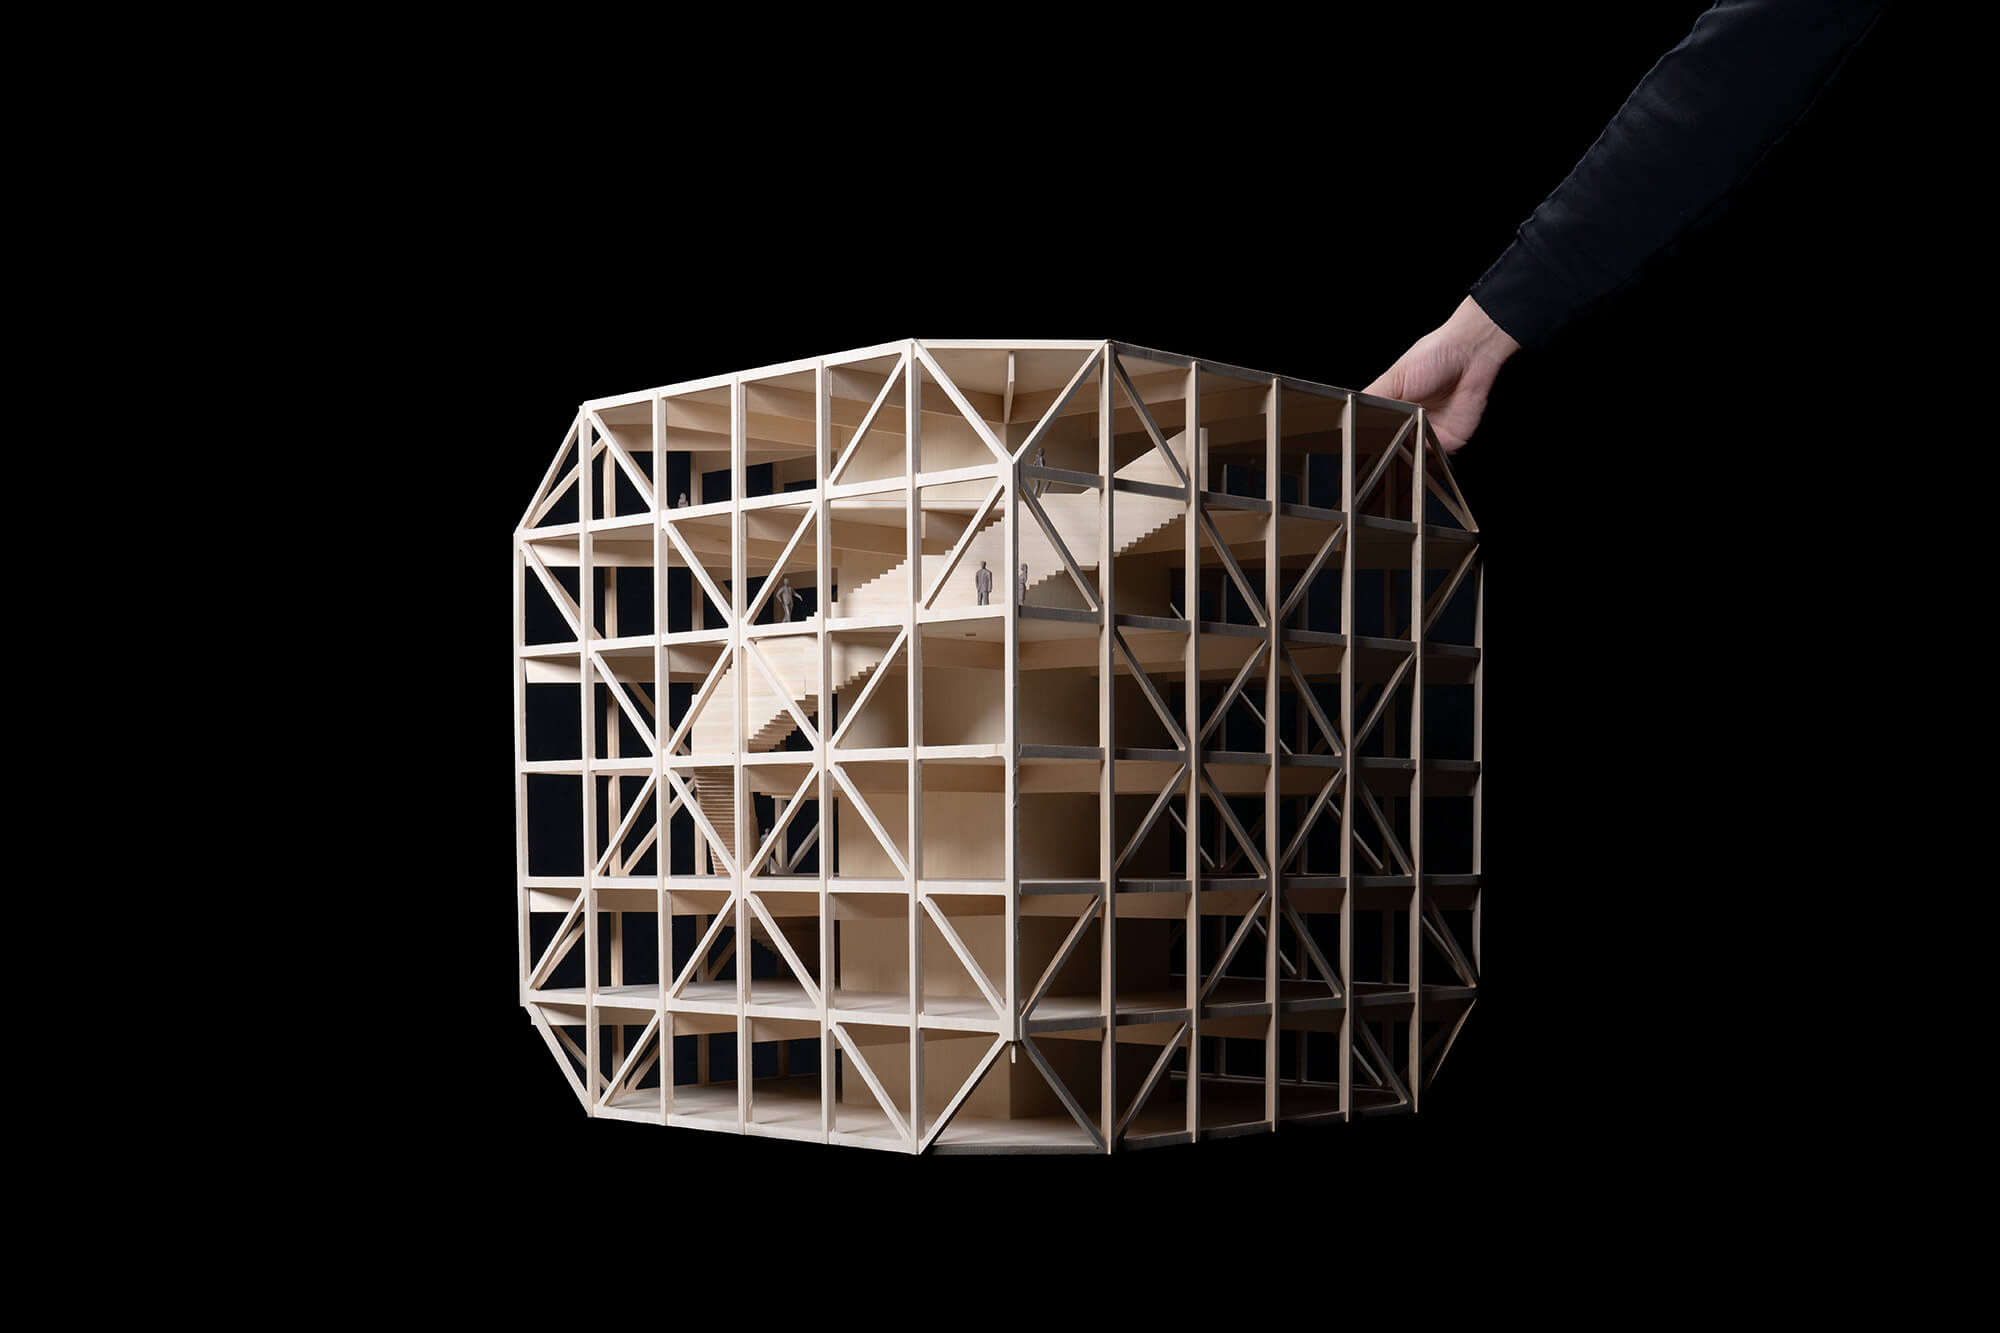 study model made of wood for Makers’ KUbe